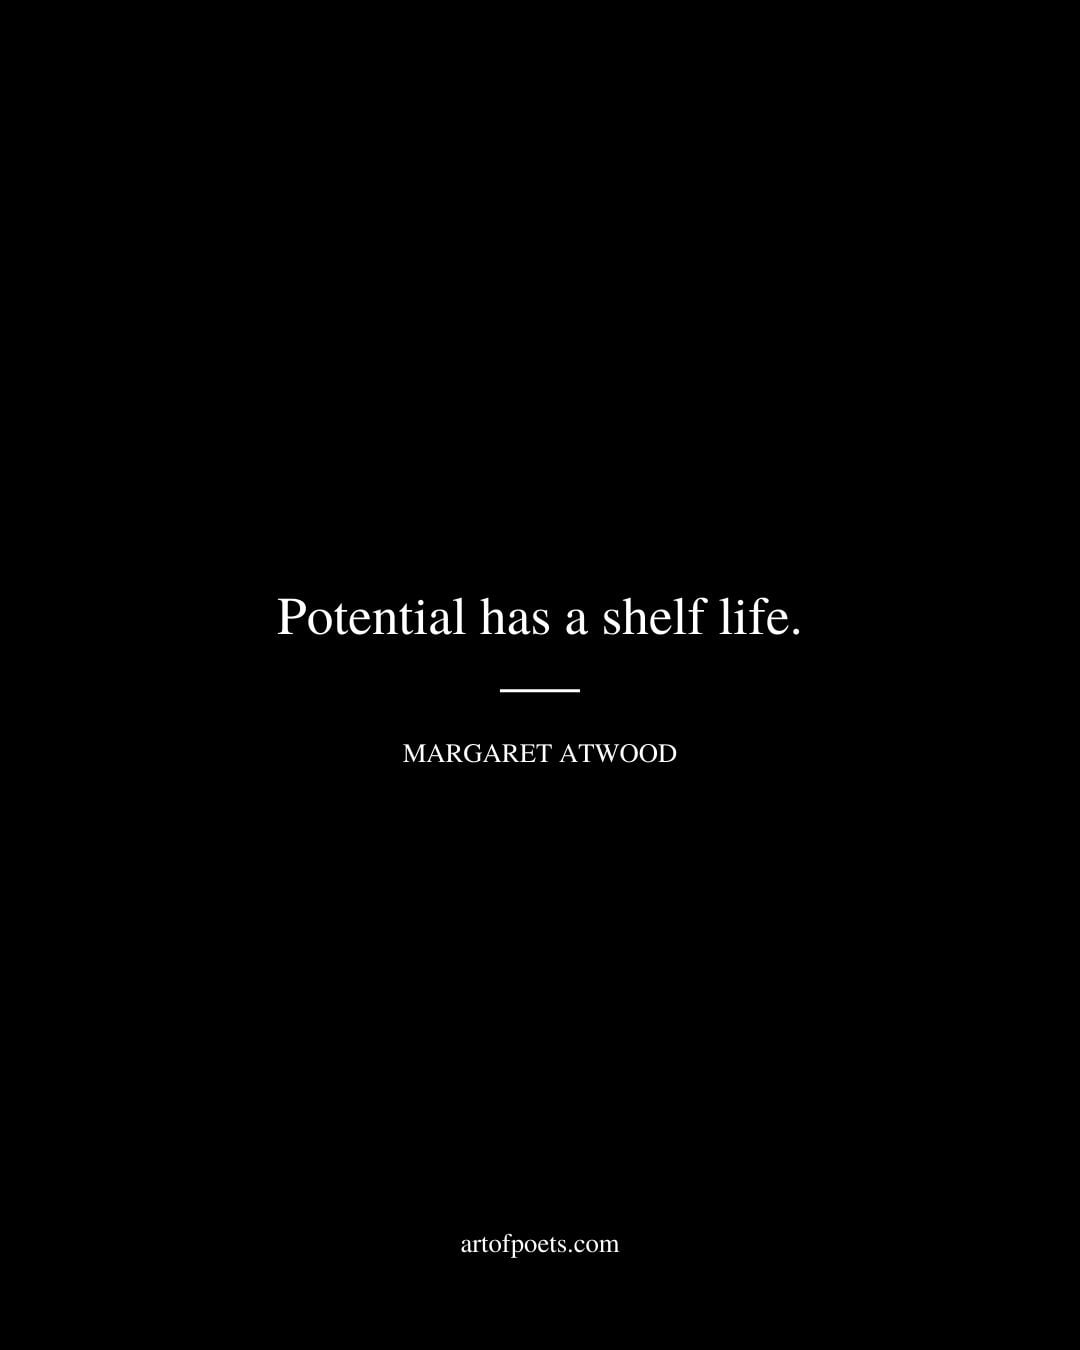 Potential has a shelf life. Margaret Atwood